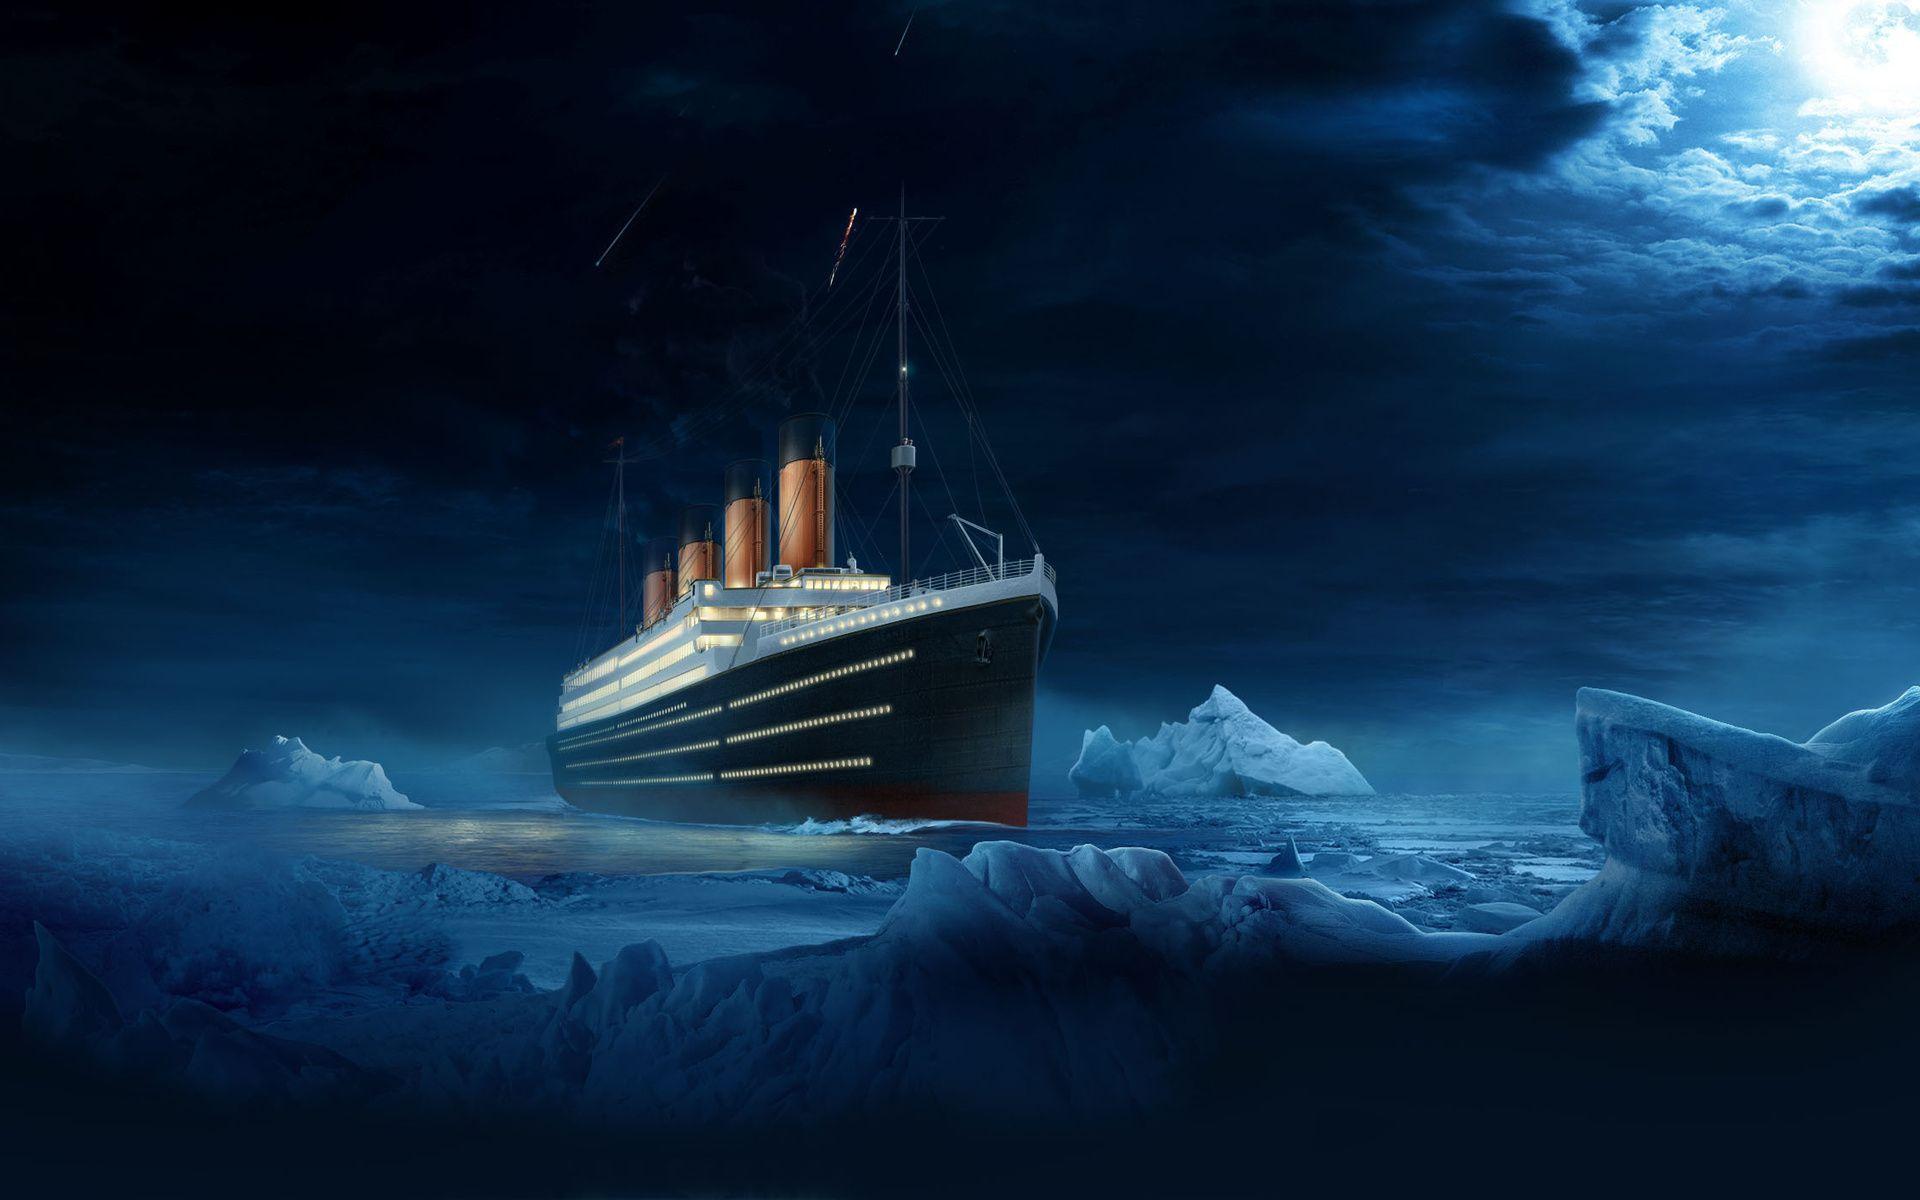 Titanic Ship Wallpaper Download 59137 HD Picture. Top Background